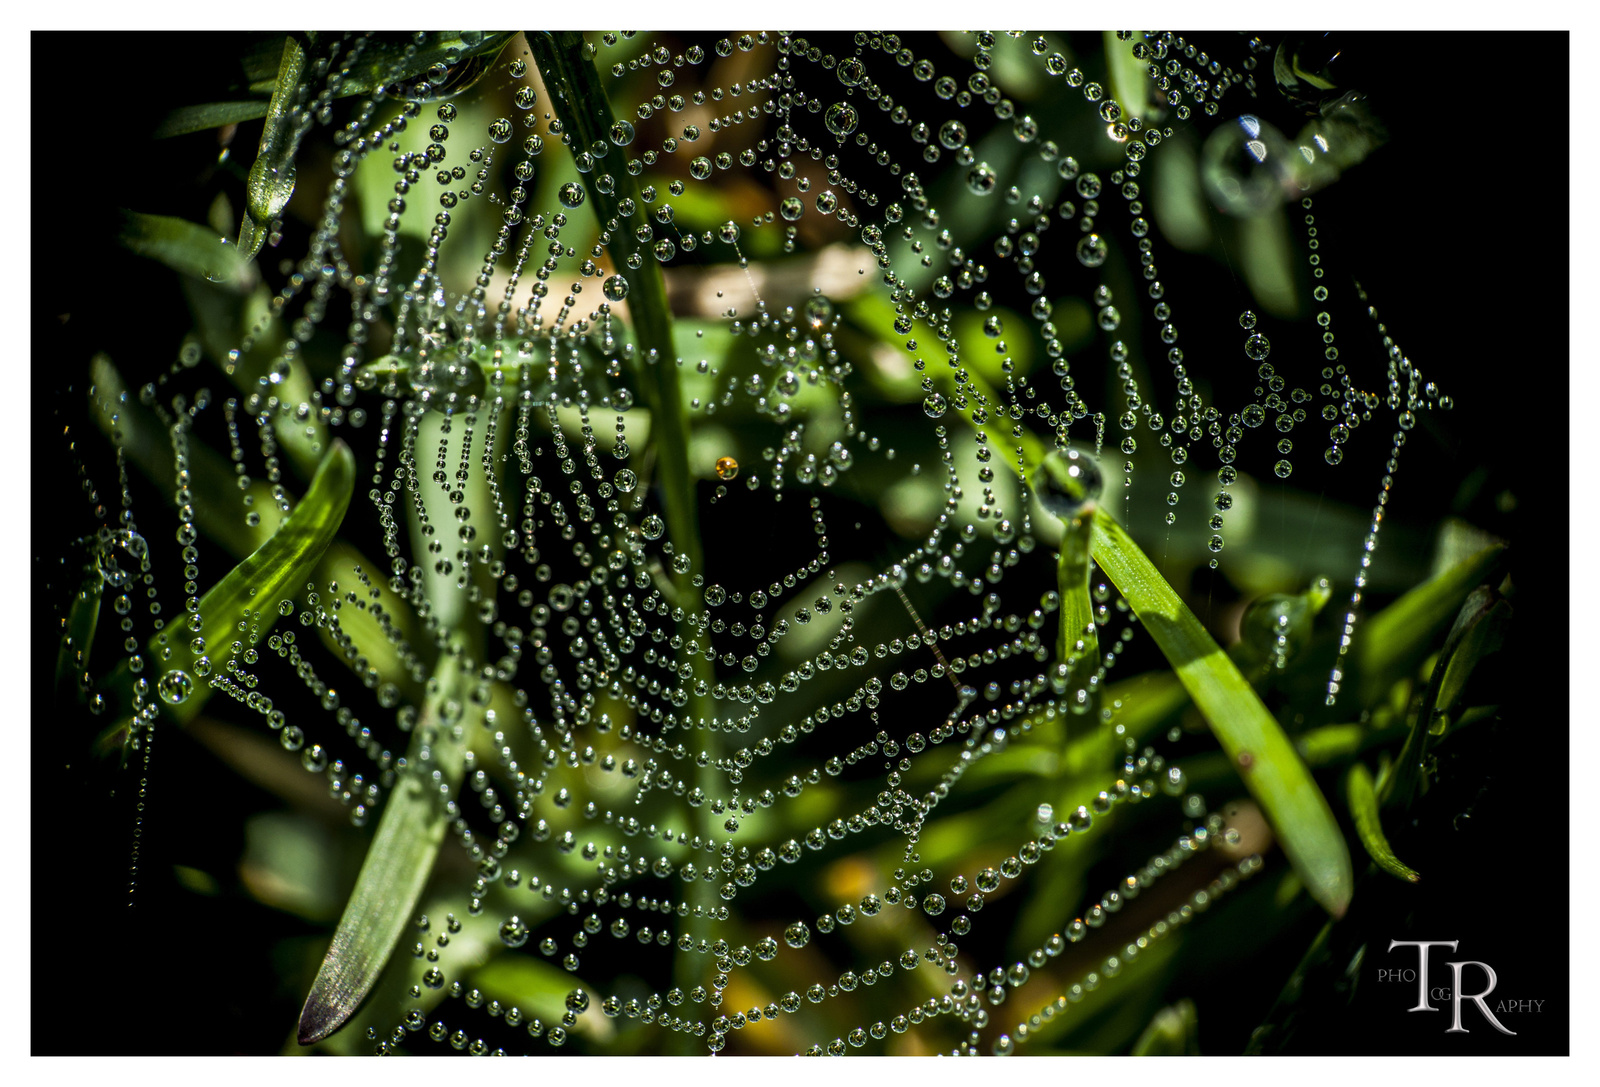 Droplets in the web